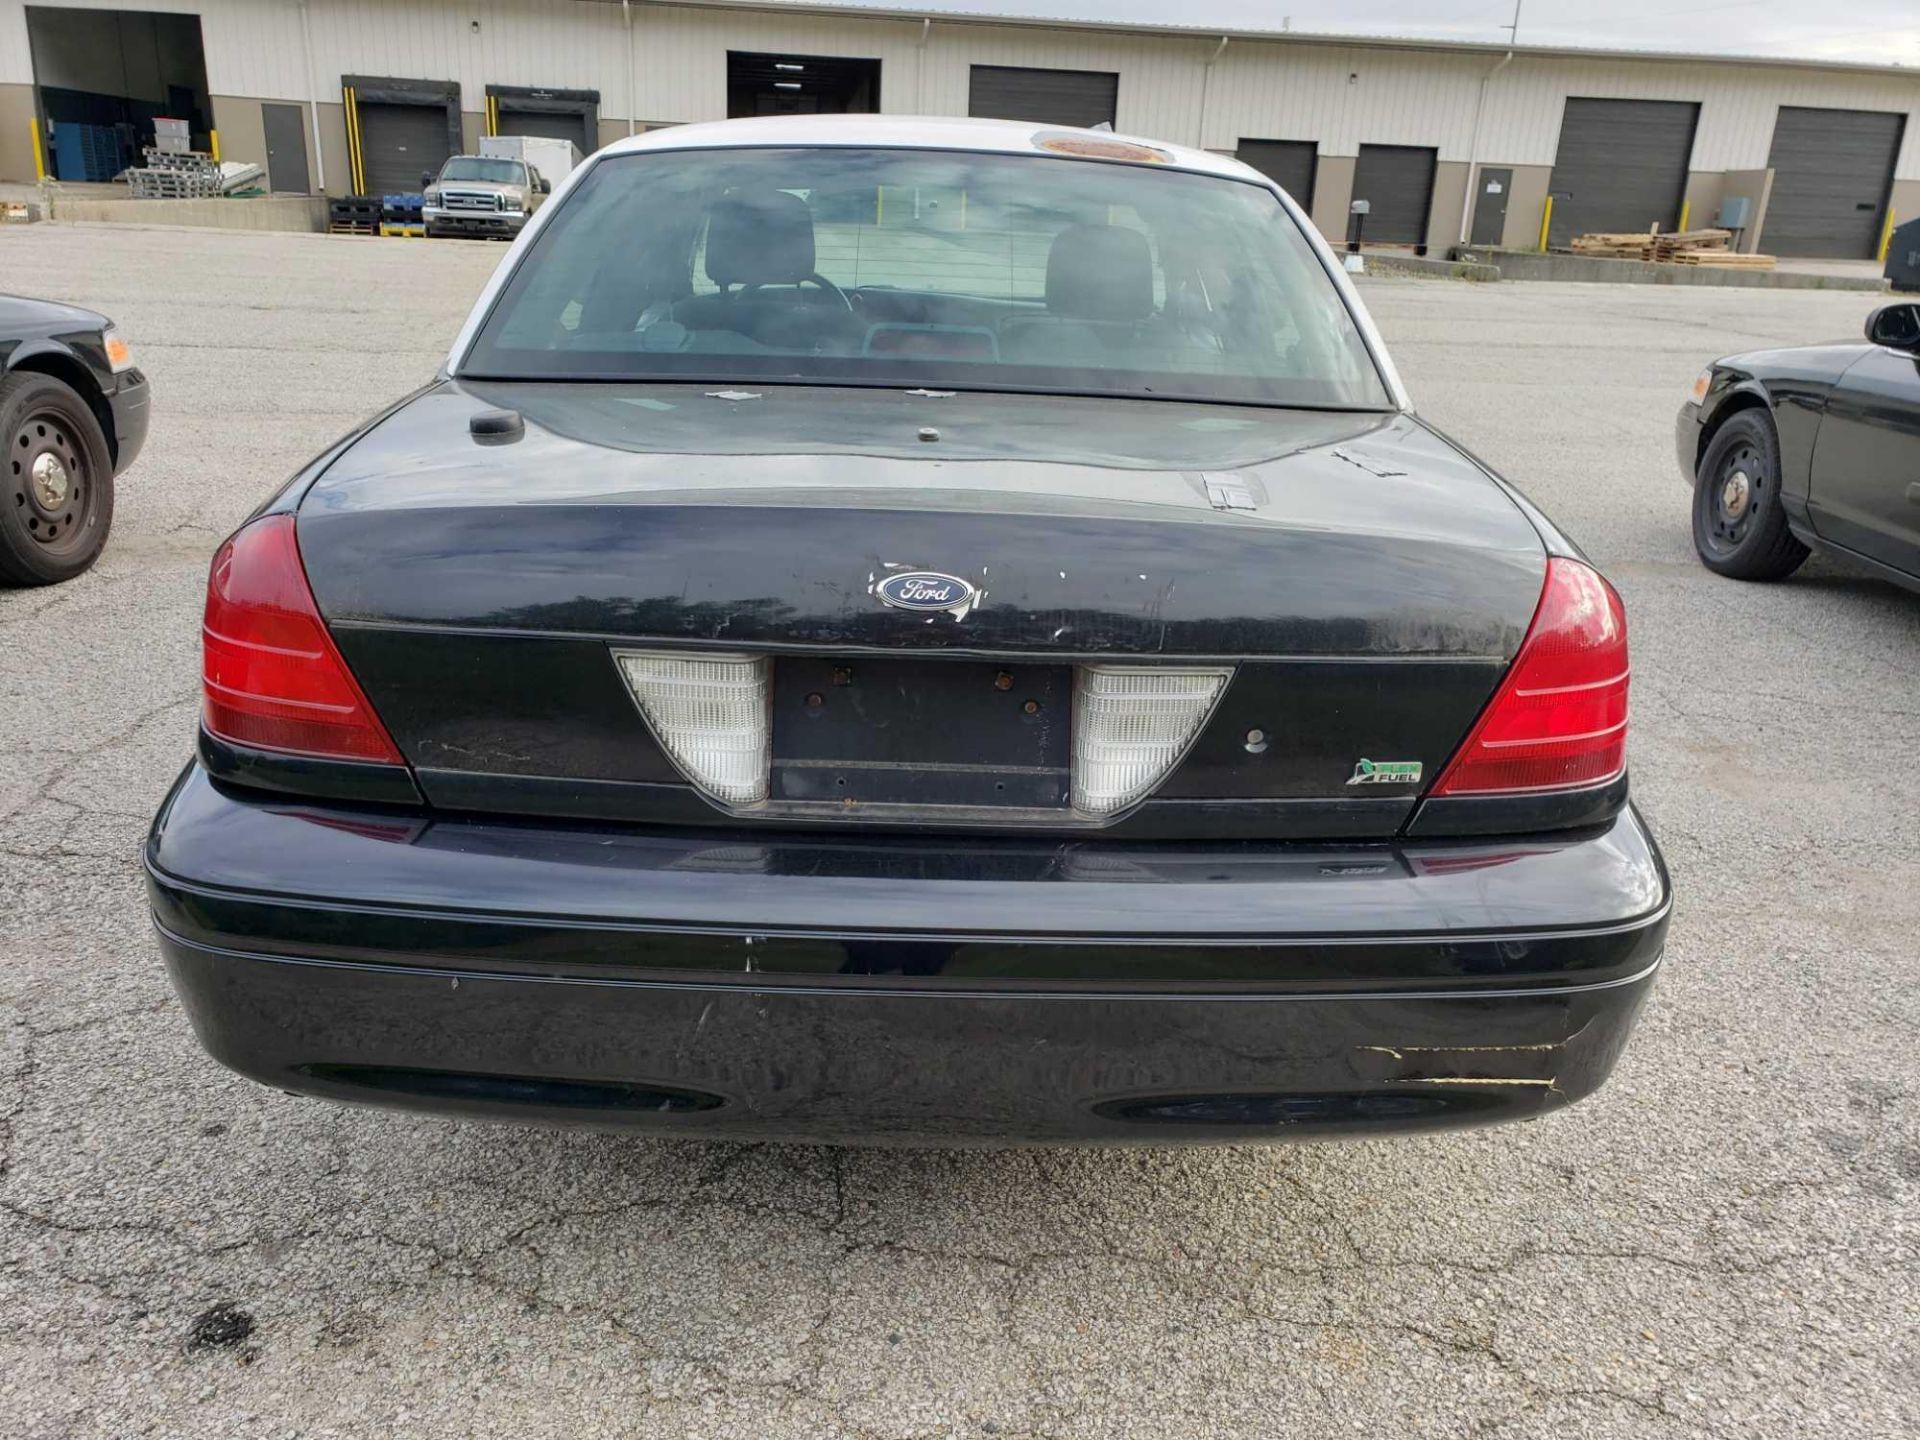 008 Ford Crown Victoria. VIN 2FAHP71V09X112075. Police Interceptor. 123,233 miles showing. - Image 3 of 19